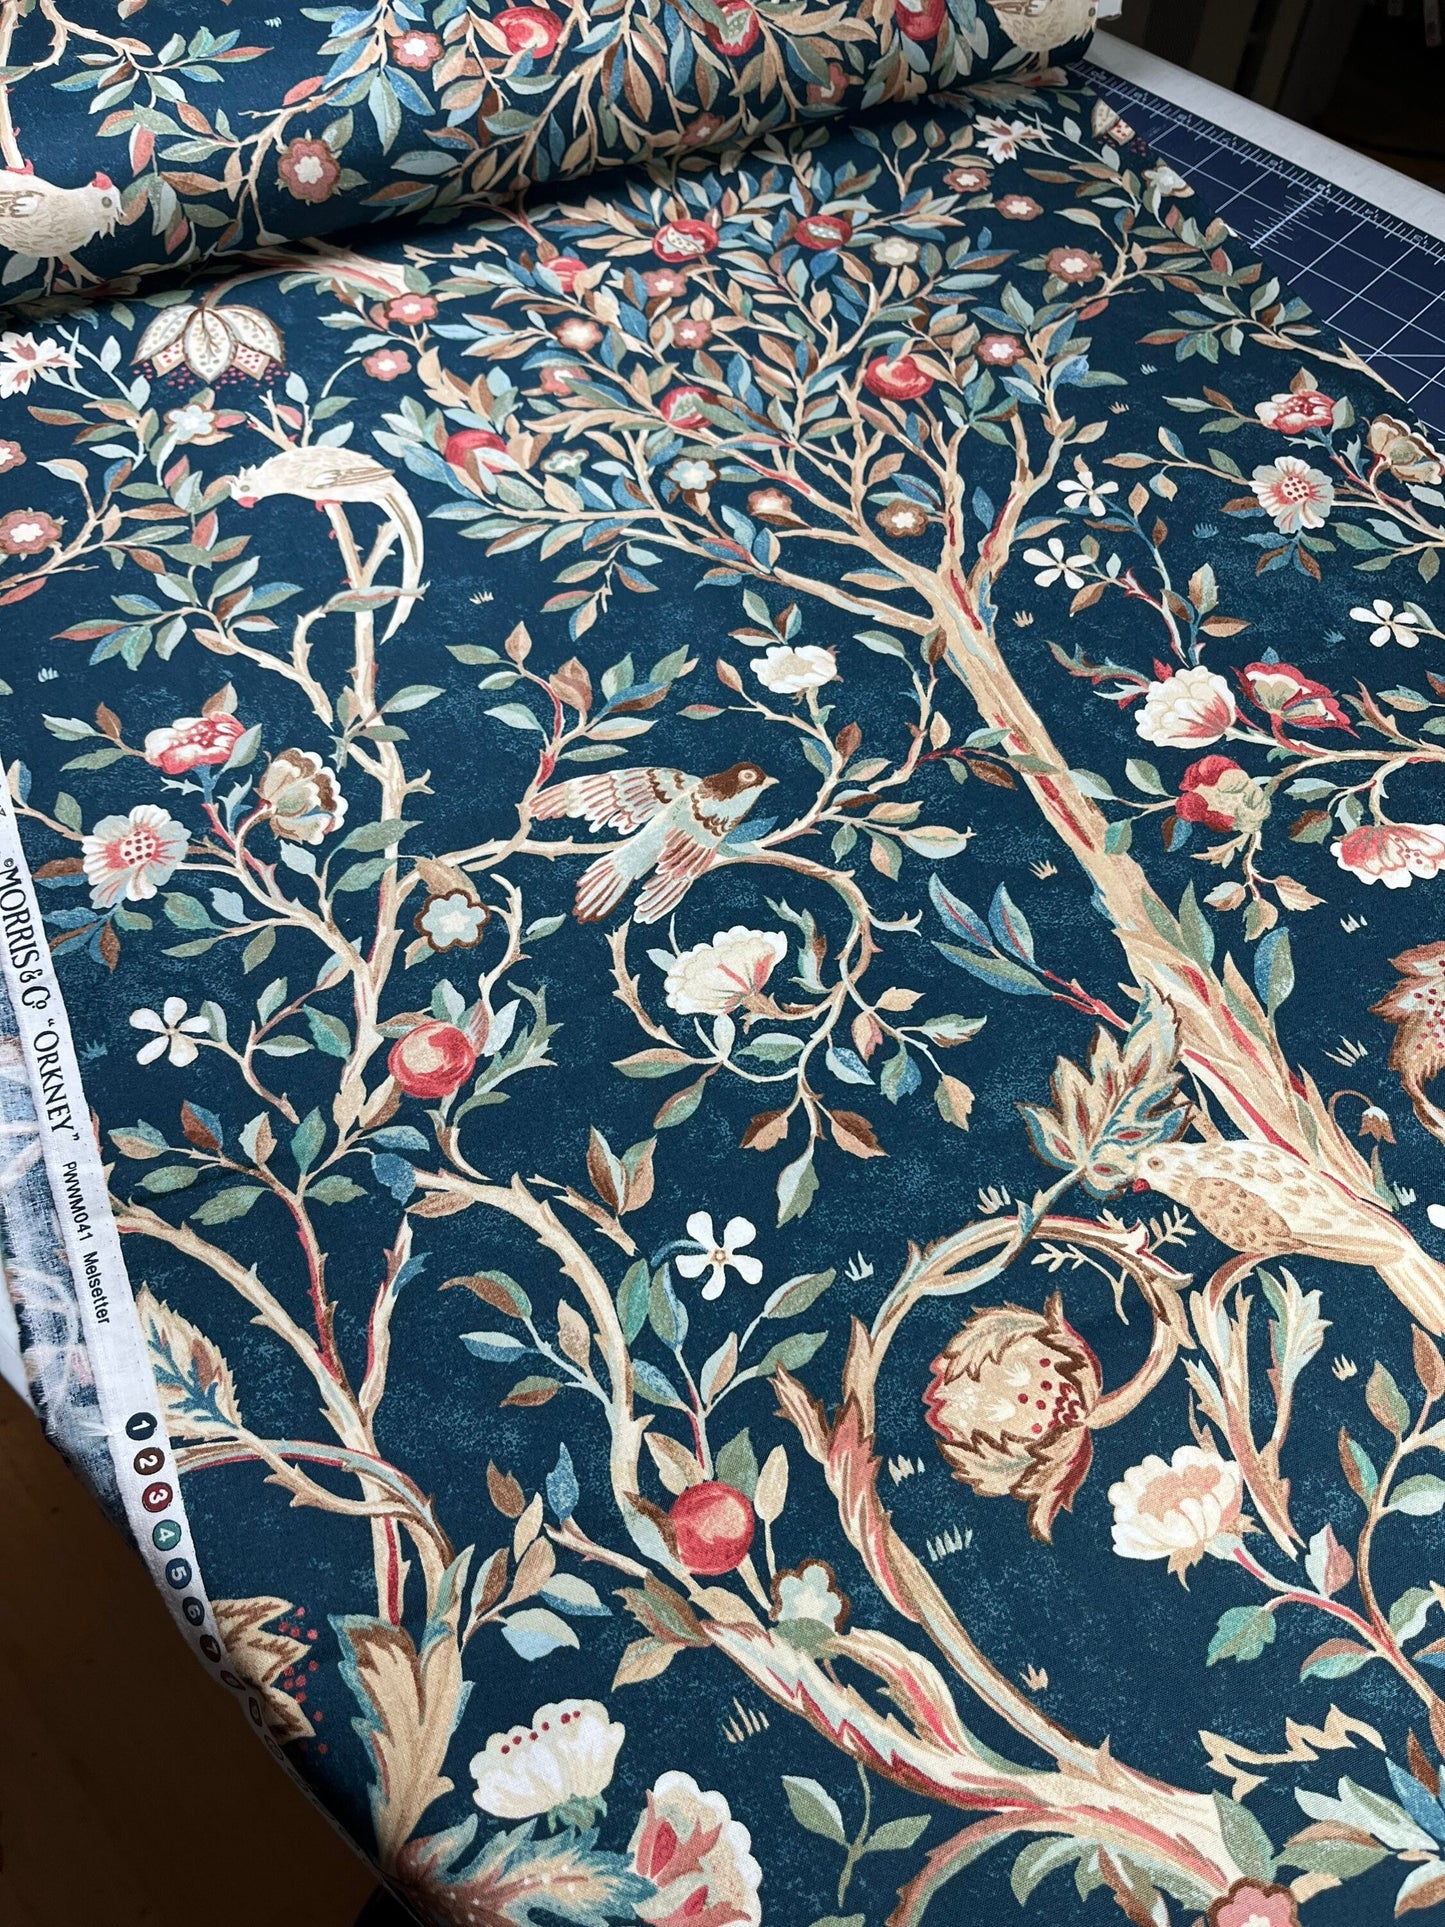 William Morris ORKNEY Melsetter Indigo PWWM041, Free Spirit Fabrics, The Original Morris & Co, Quilt Fabric, Cotton, Fabric By The Yard